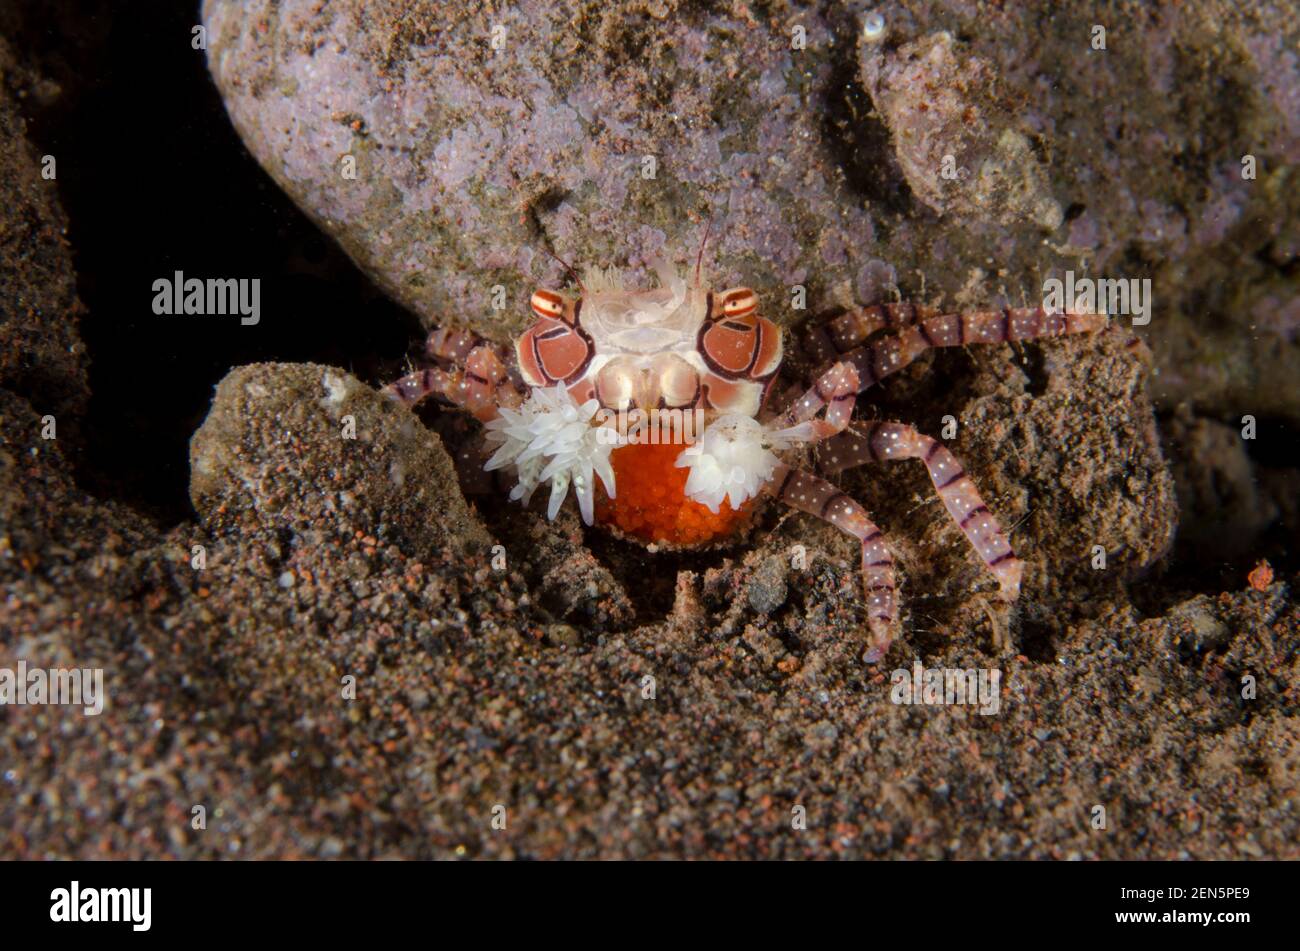 Pom-pom Crab, Lybia tesselata, with clutch of eggs holding Anemones, Triactis producta, in modified chelae for protection, Batu Niti dive site, Seraya Stock Photo